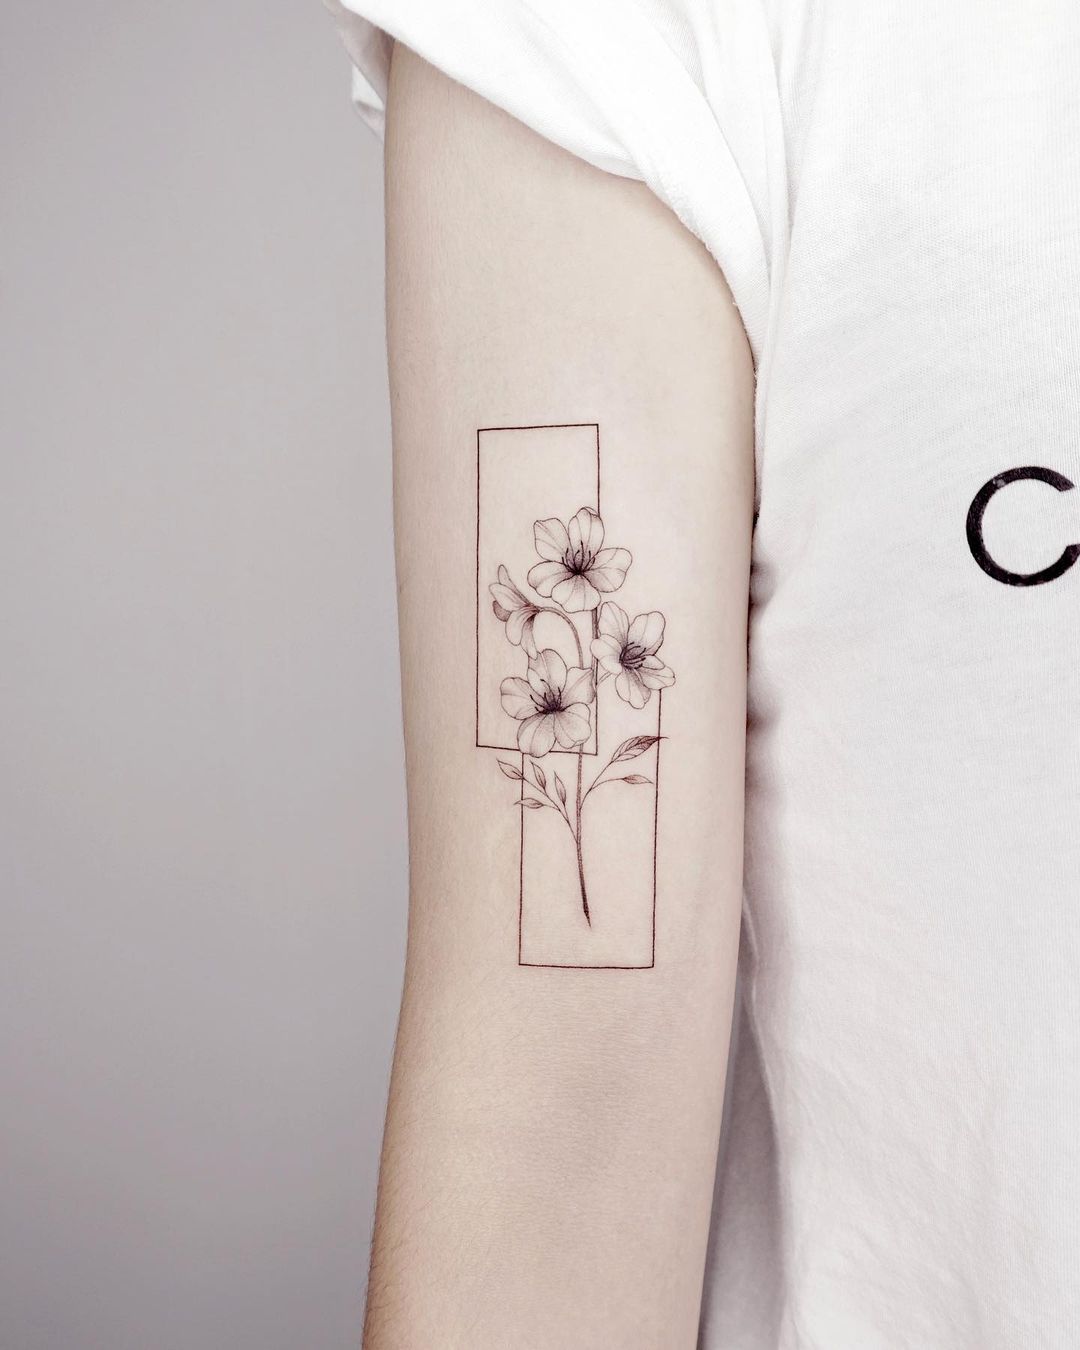 Black and White Flower in Rectangle Tattoo on Arm